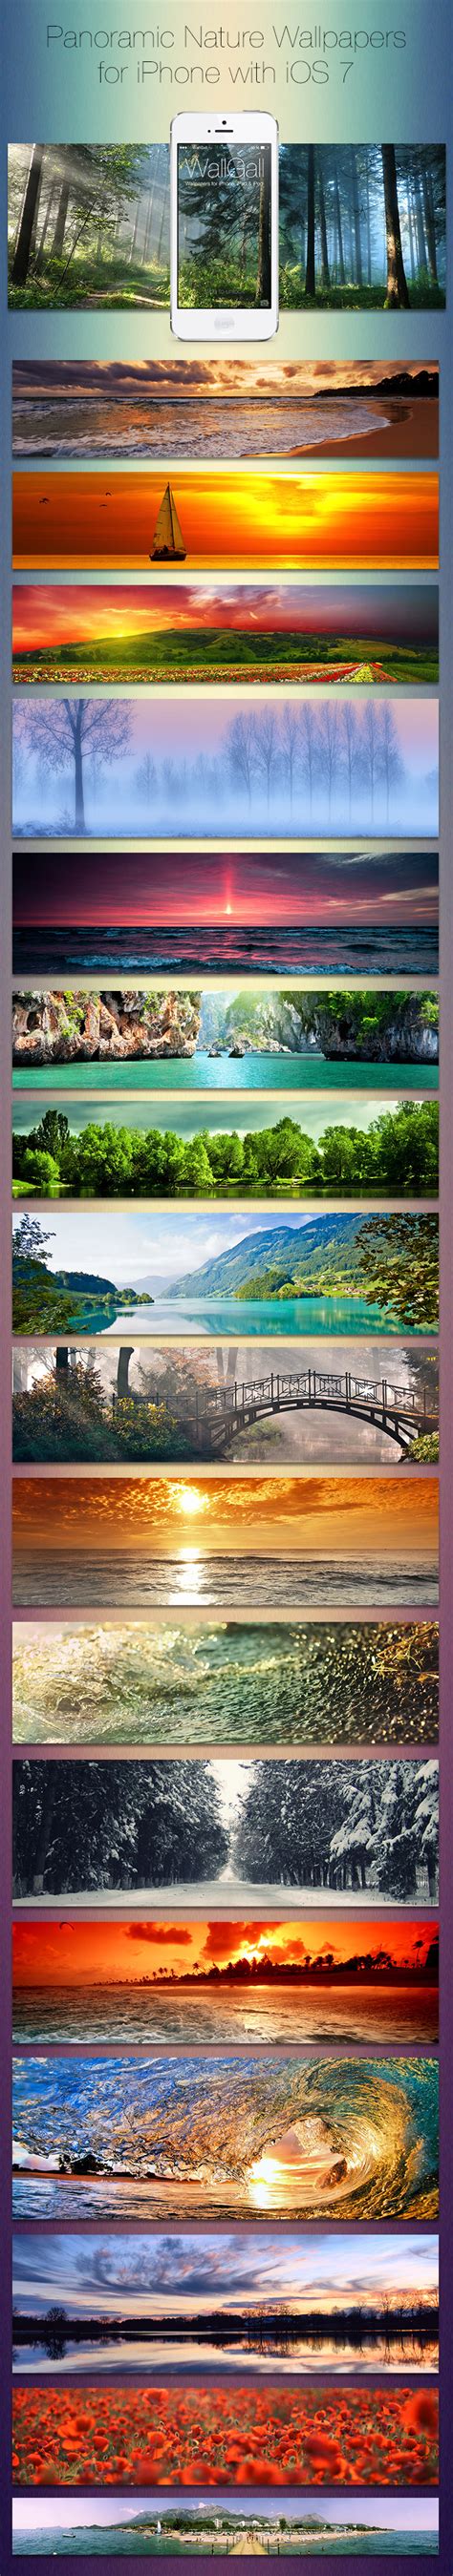 Ios 7 Panoramic Wallpaper Pack For Iphone Nature By Coldik On Deviantart